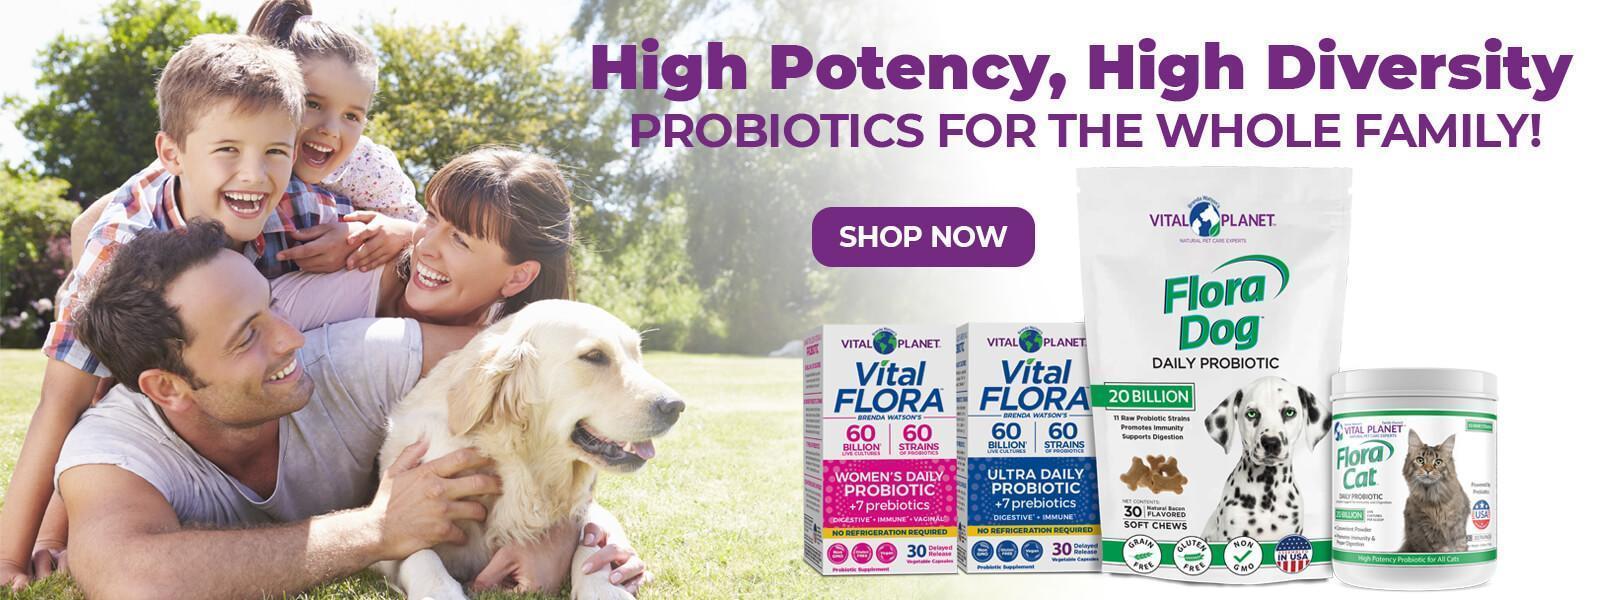 High potency, high diversity probiotics for the whole family